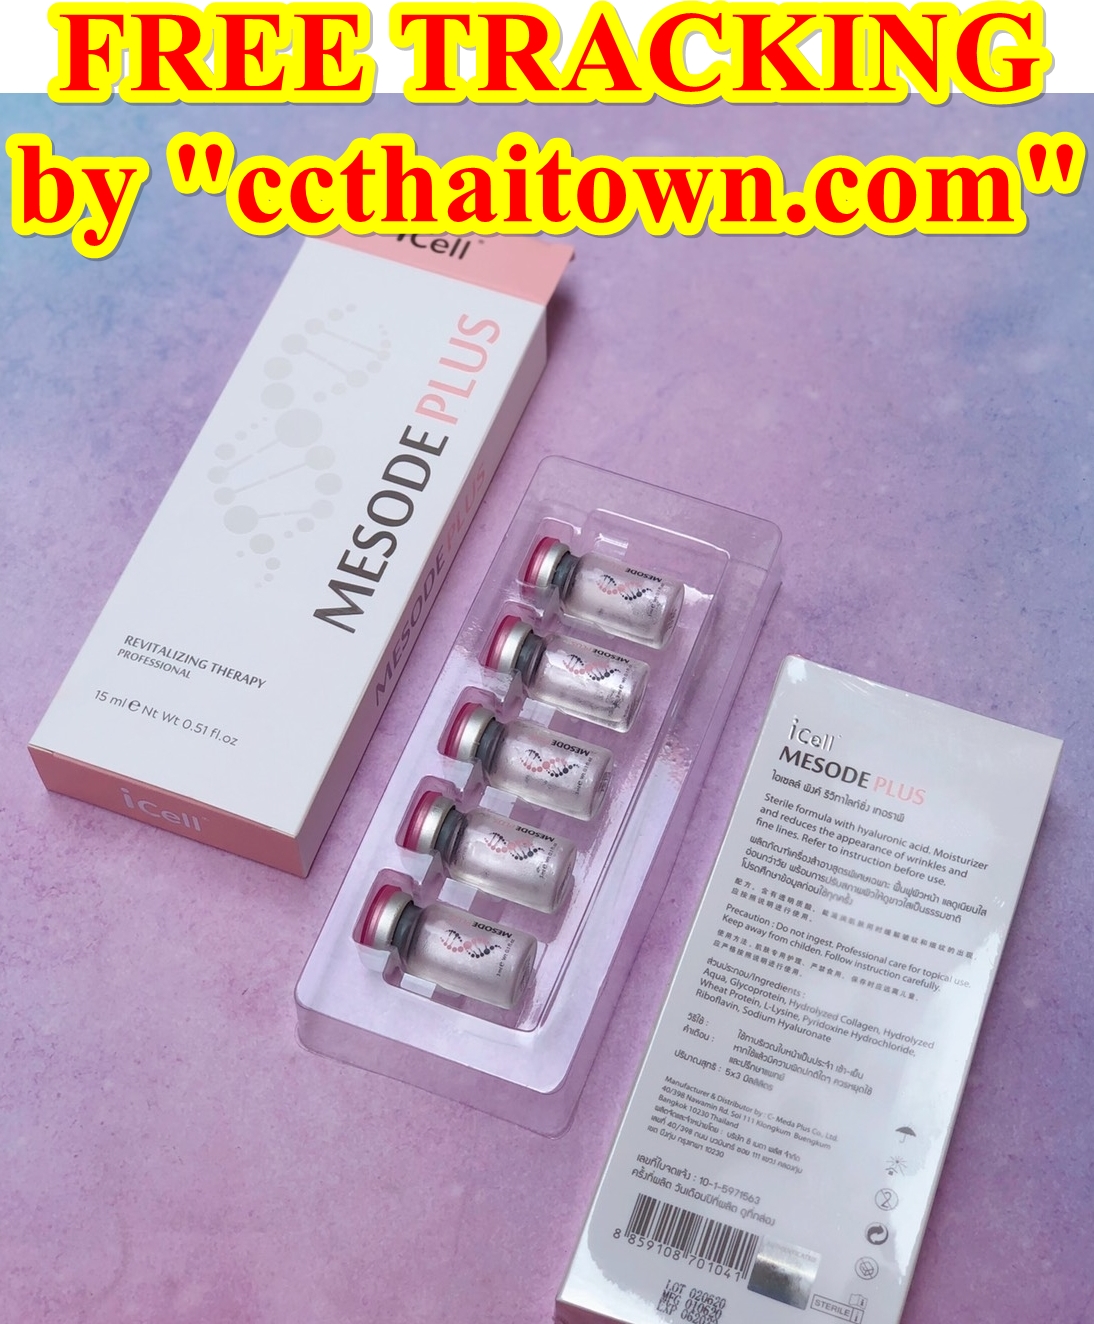 MESODE PLUS ICELL RESTORE MIRACLE SUPER ACTIVE WHITENING AURA www.ccthaitown.com